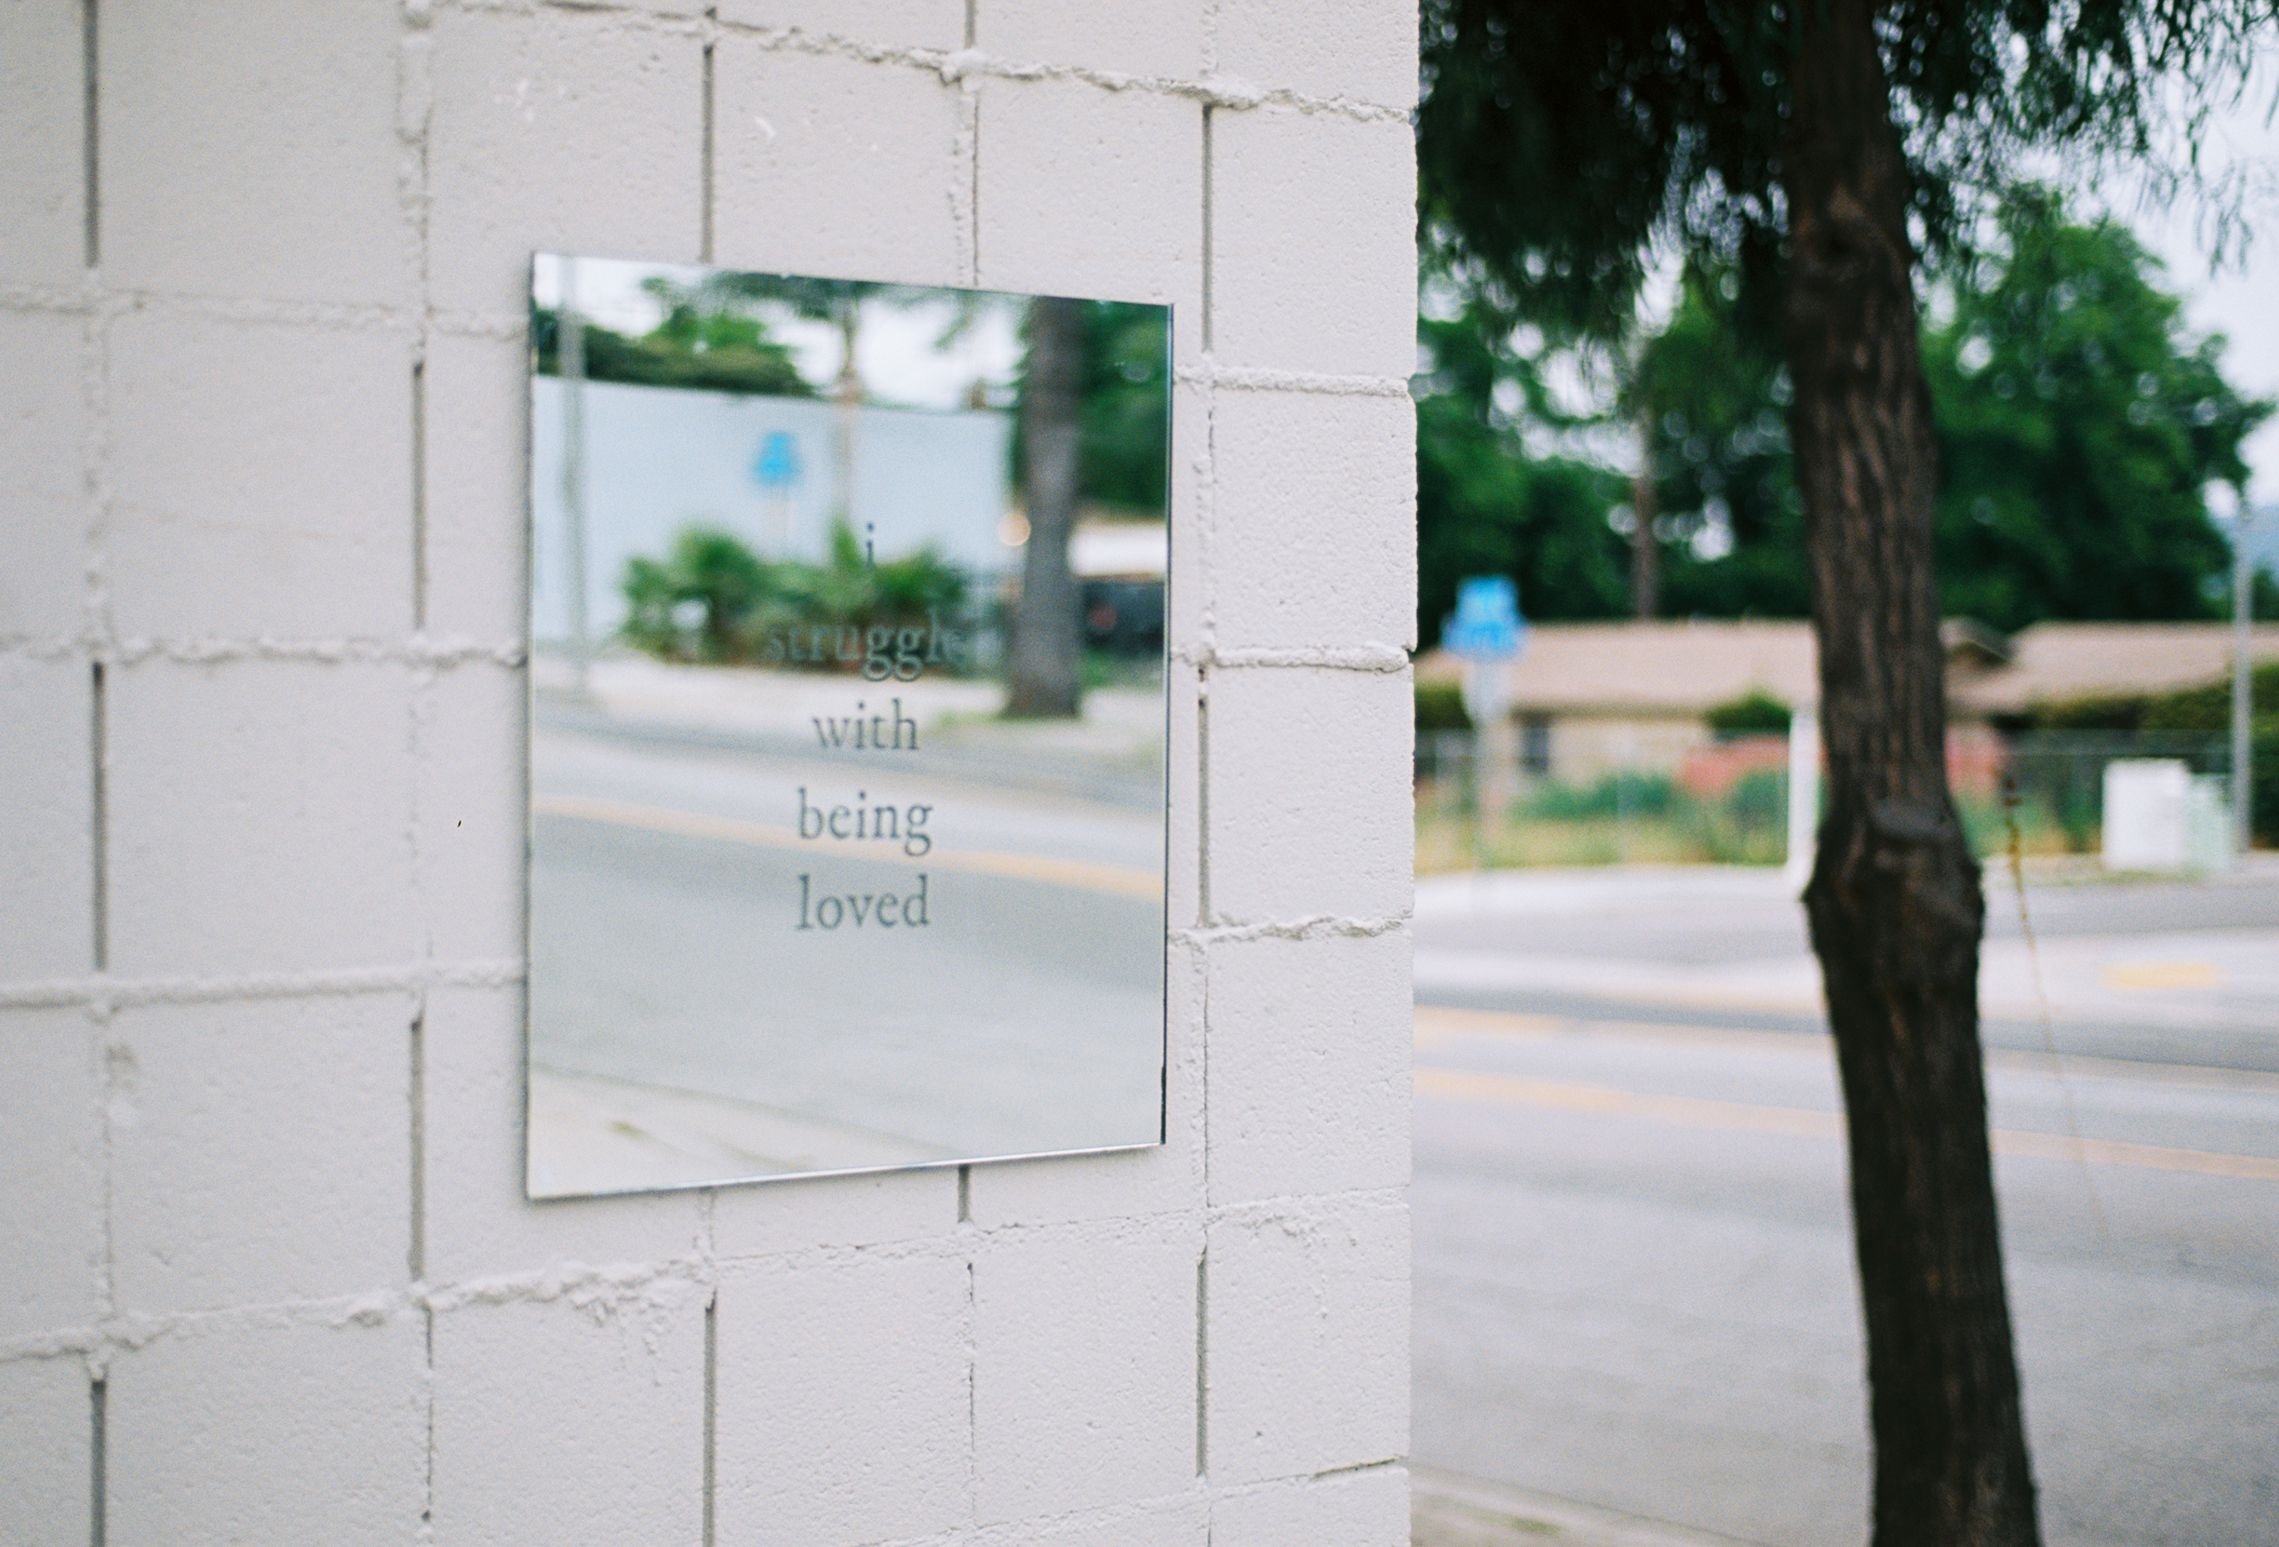 "i struggle with being loved", Lincoln Ave (Altadena)